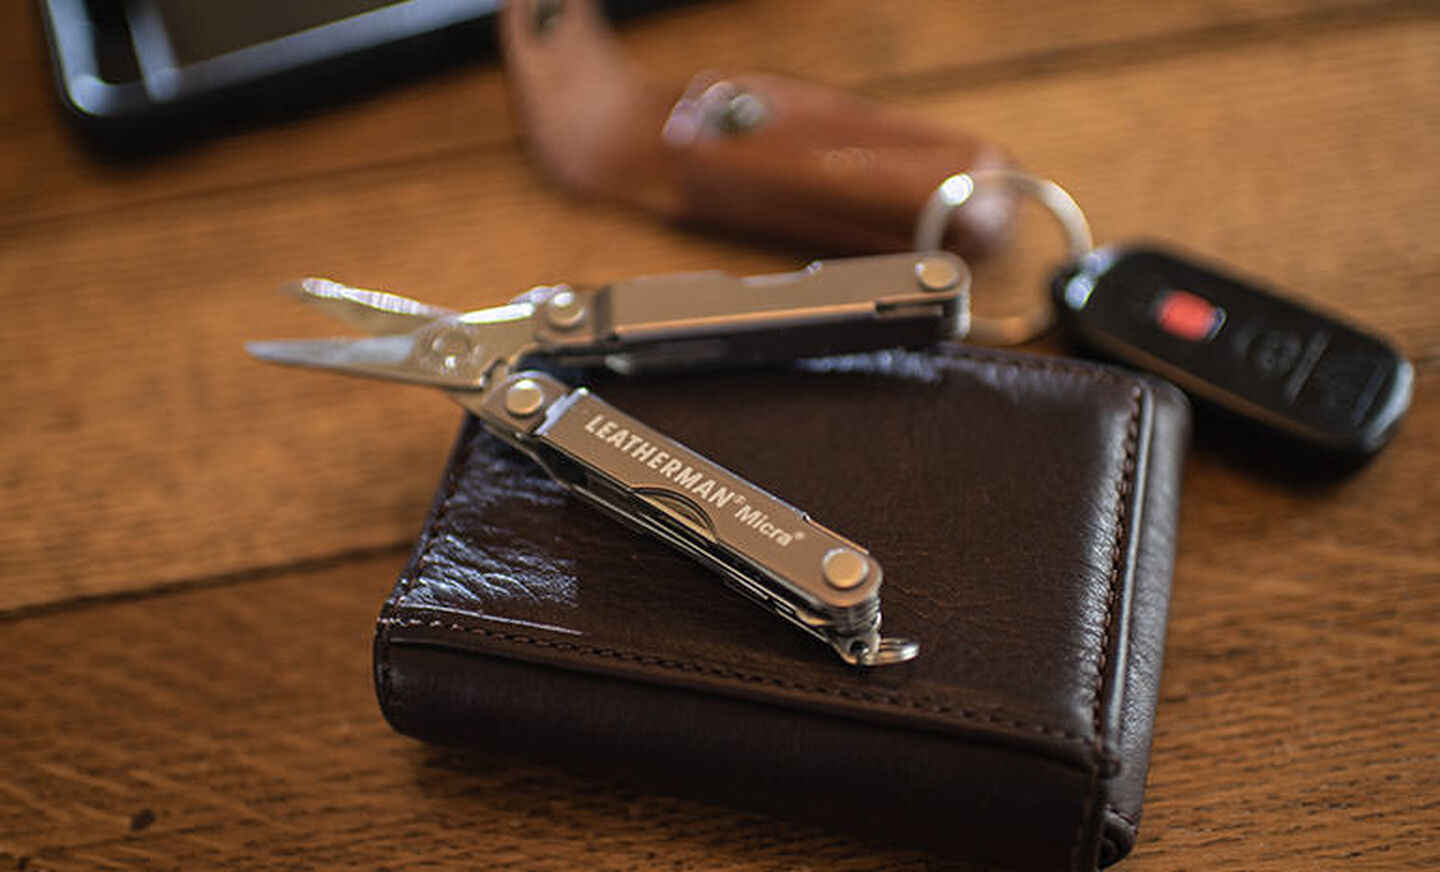 Stainless steel Leatherman Micra on top of dark brown wallet next to key fob on table 